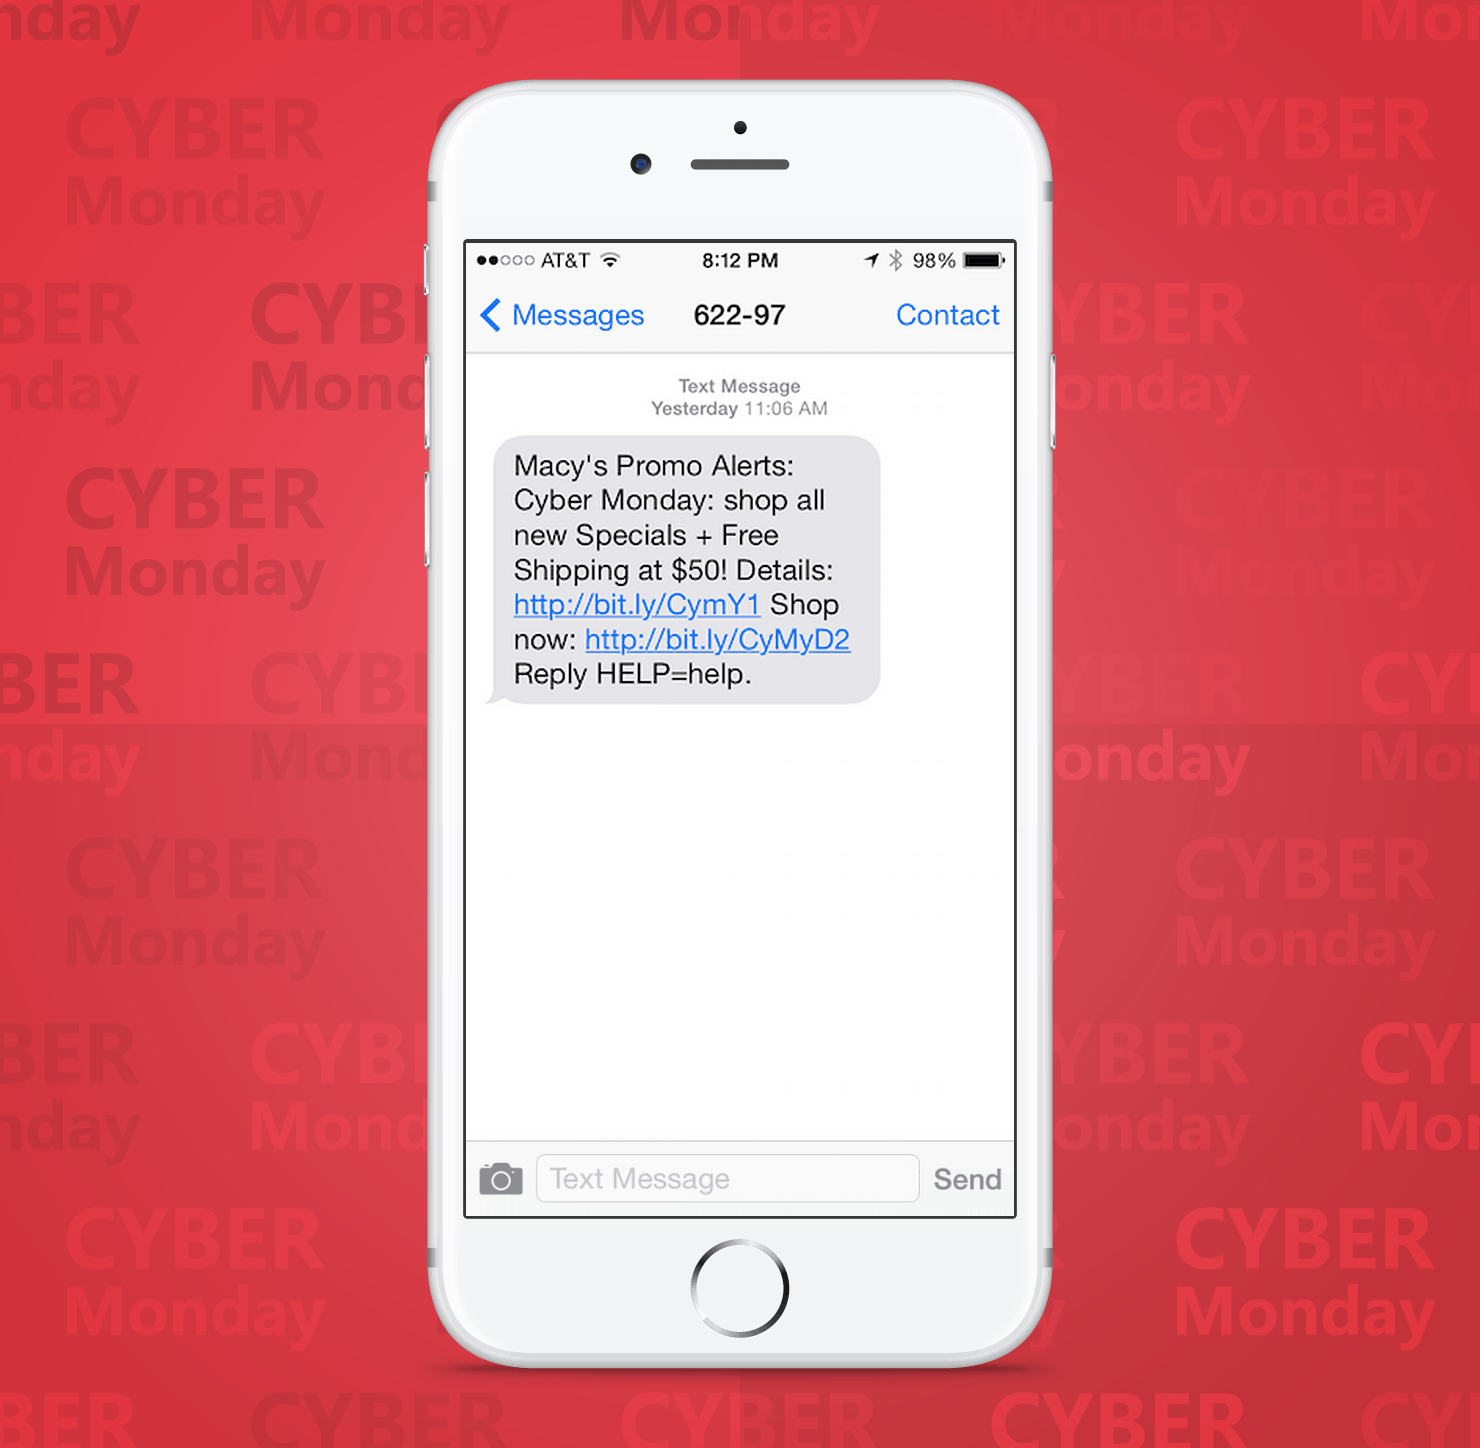 SMS Coupon Example Sent on Cyber Monday From Macys Retail Store to Customers